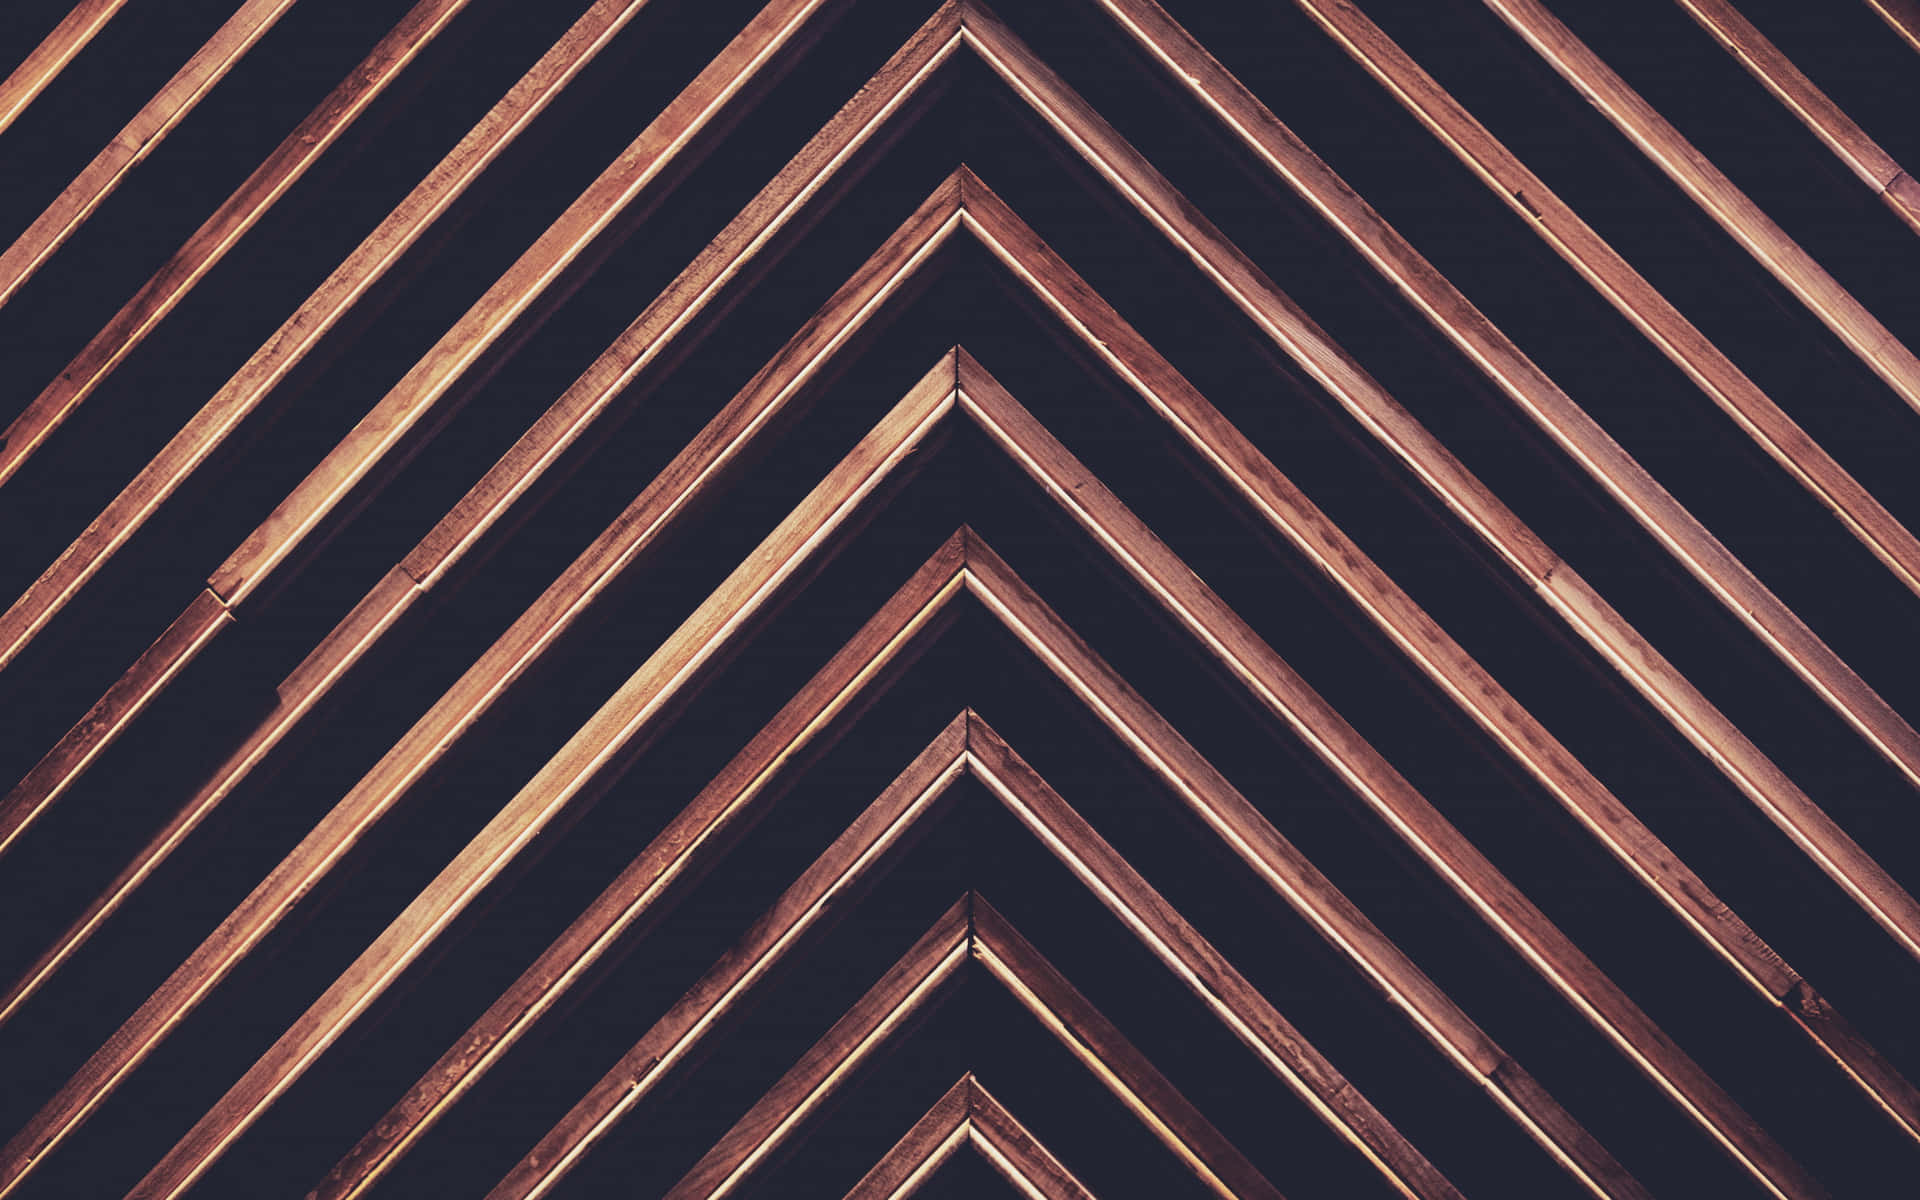 A Wooden Background With A Zig Zag Pattern